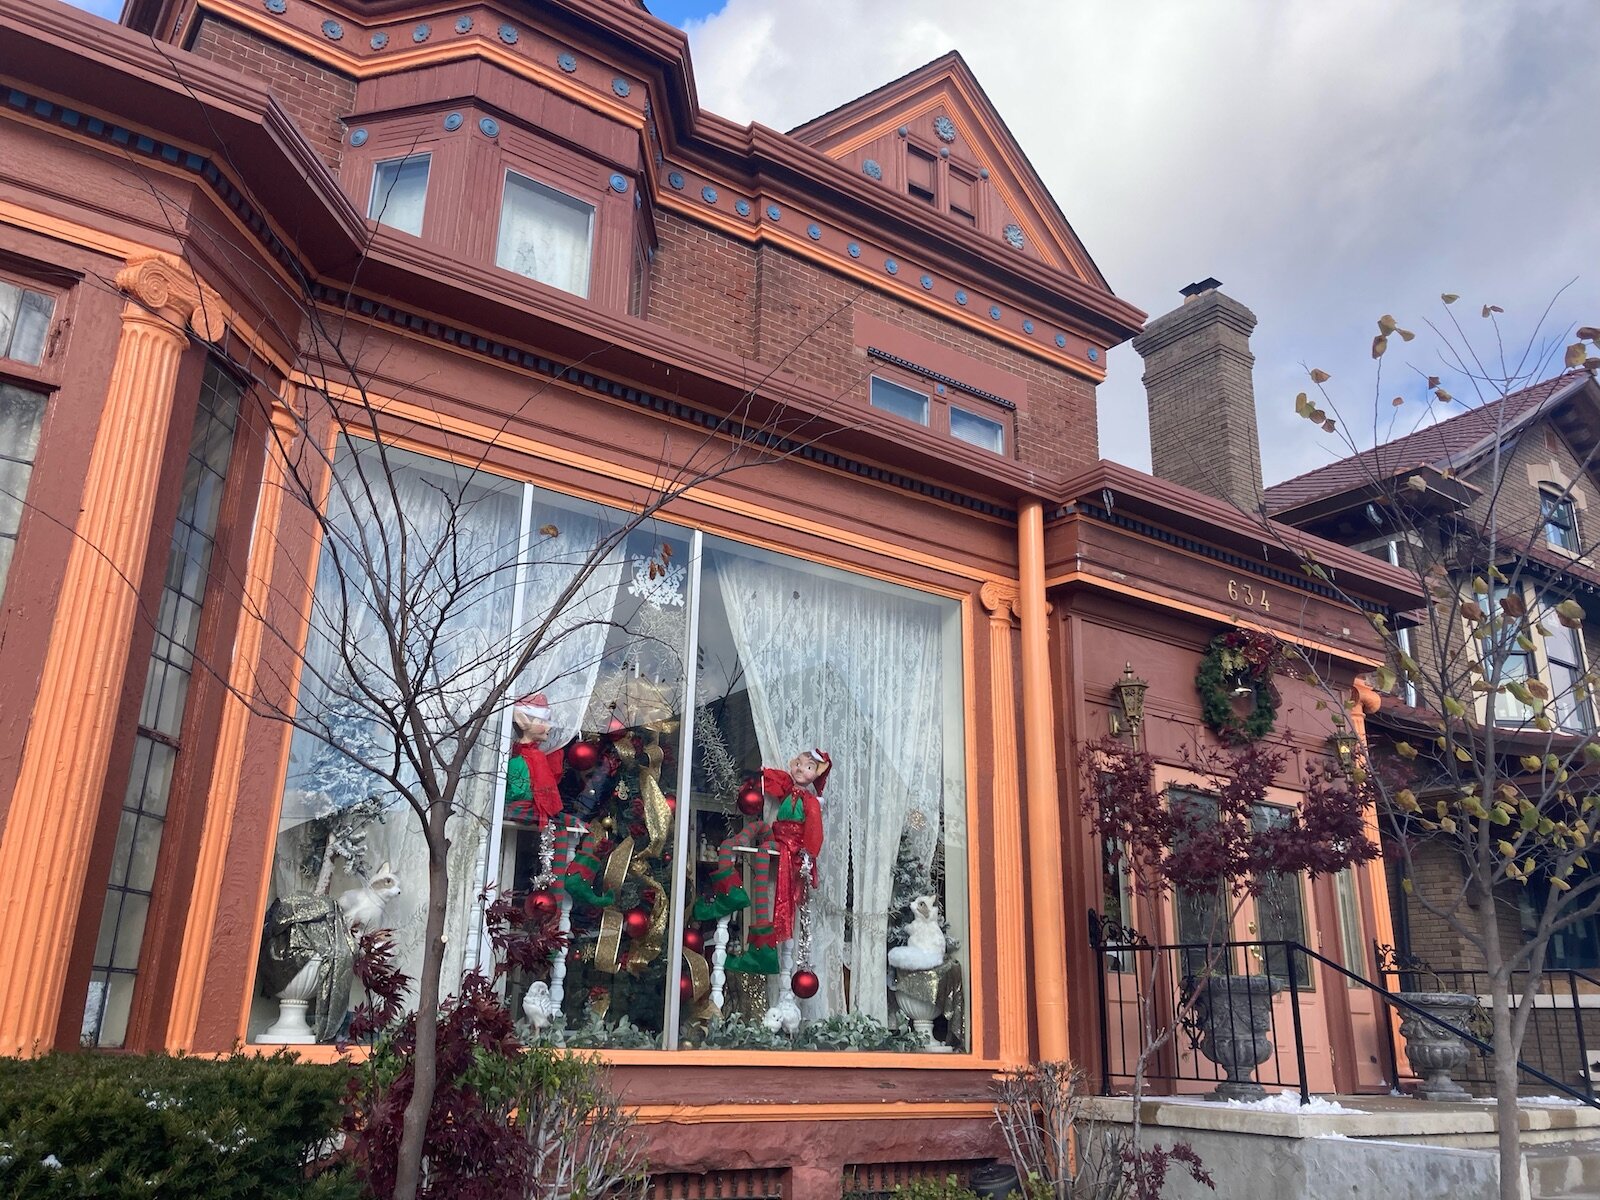 Sharon’s Victorian House of Gifts has an assortment of vintage and handcrafted items.